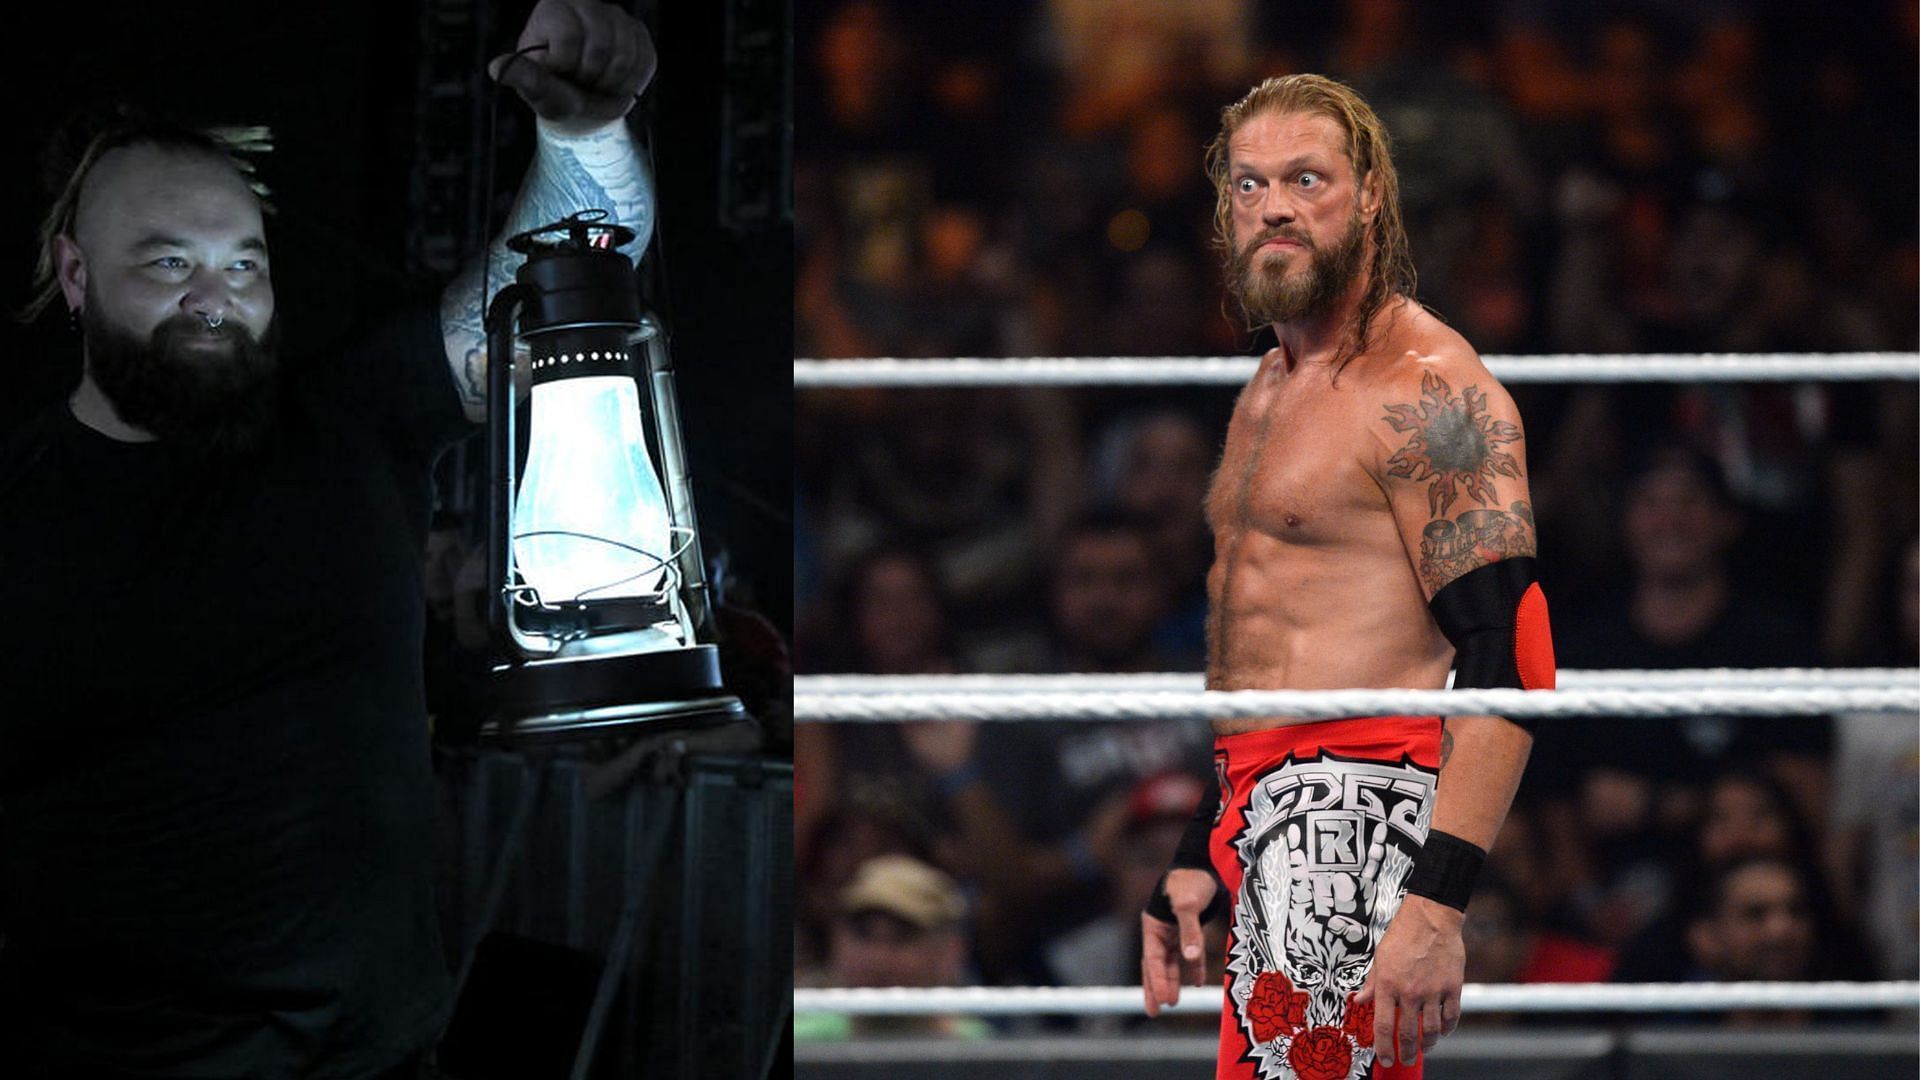 Bray Wyatt vs. Edge is a unique dream match that is running out of time to happen